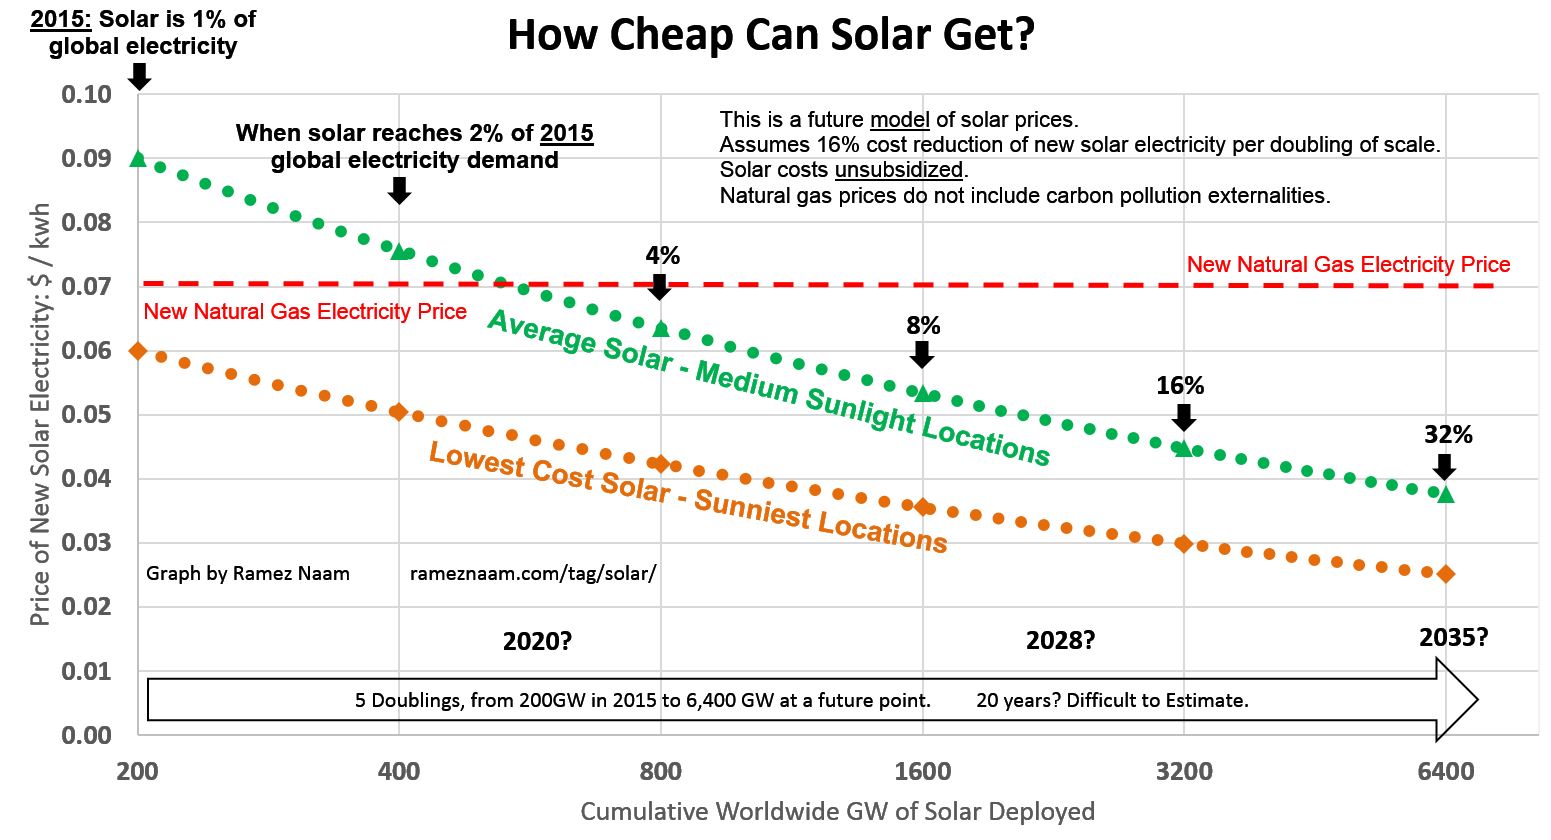 How cheap can solar get? Very cheap indeed.